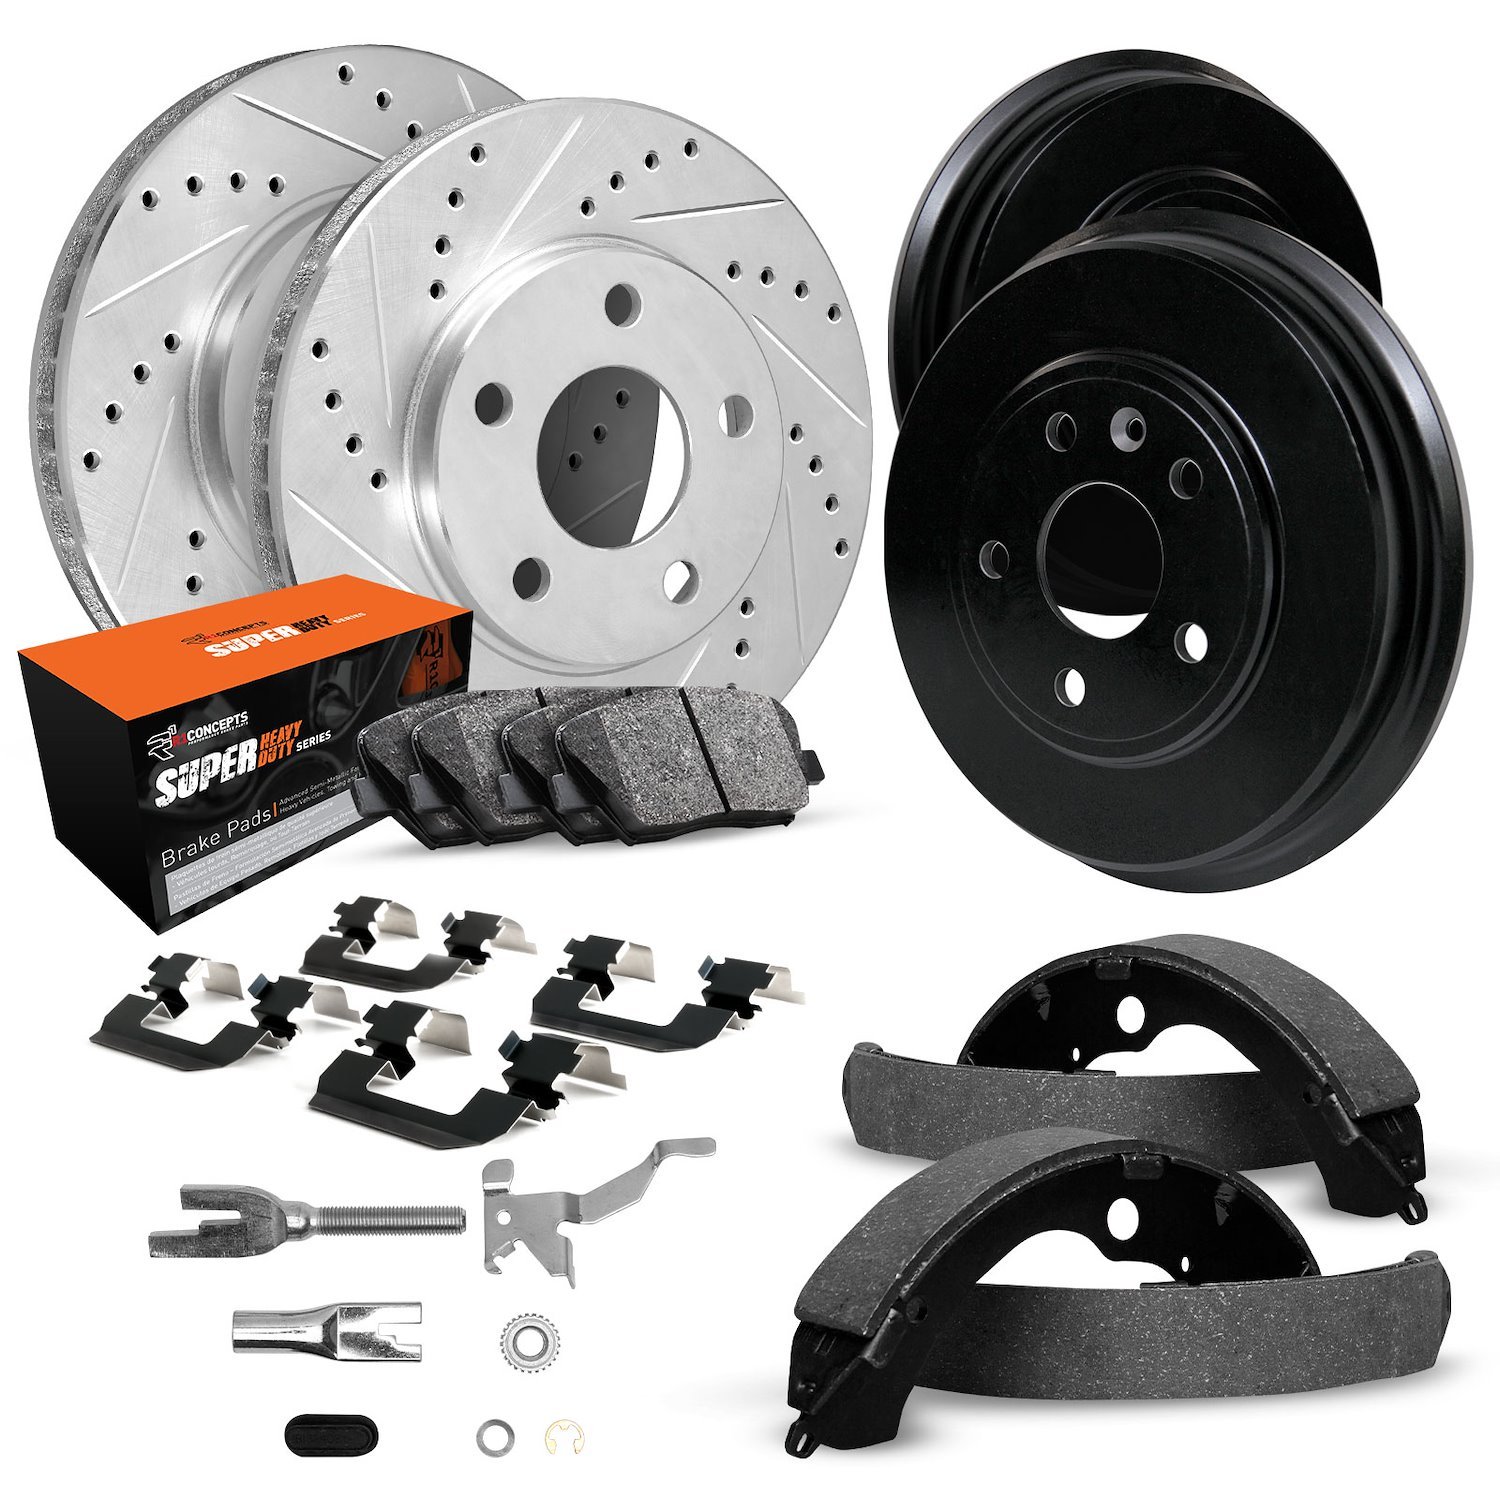 E-Line Drilled/Slotted Silver Rotor & Drum Set w/Super-Duty Pads, Shoes/Hardware/Adjusters, 1974-1975 Mopar